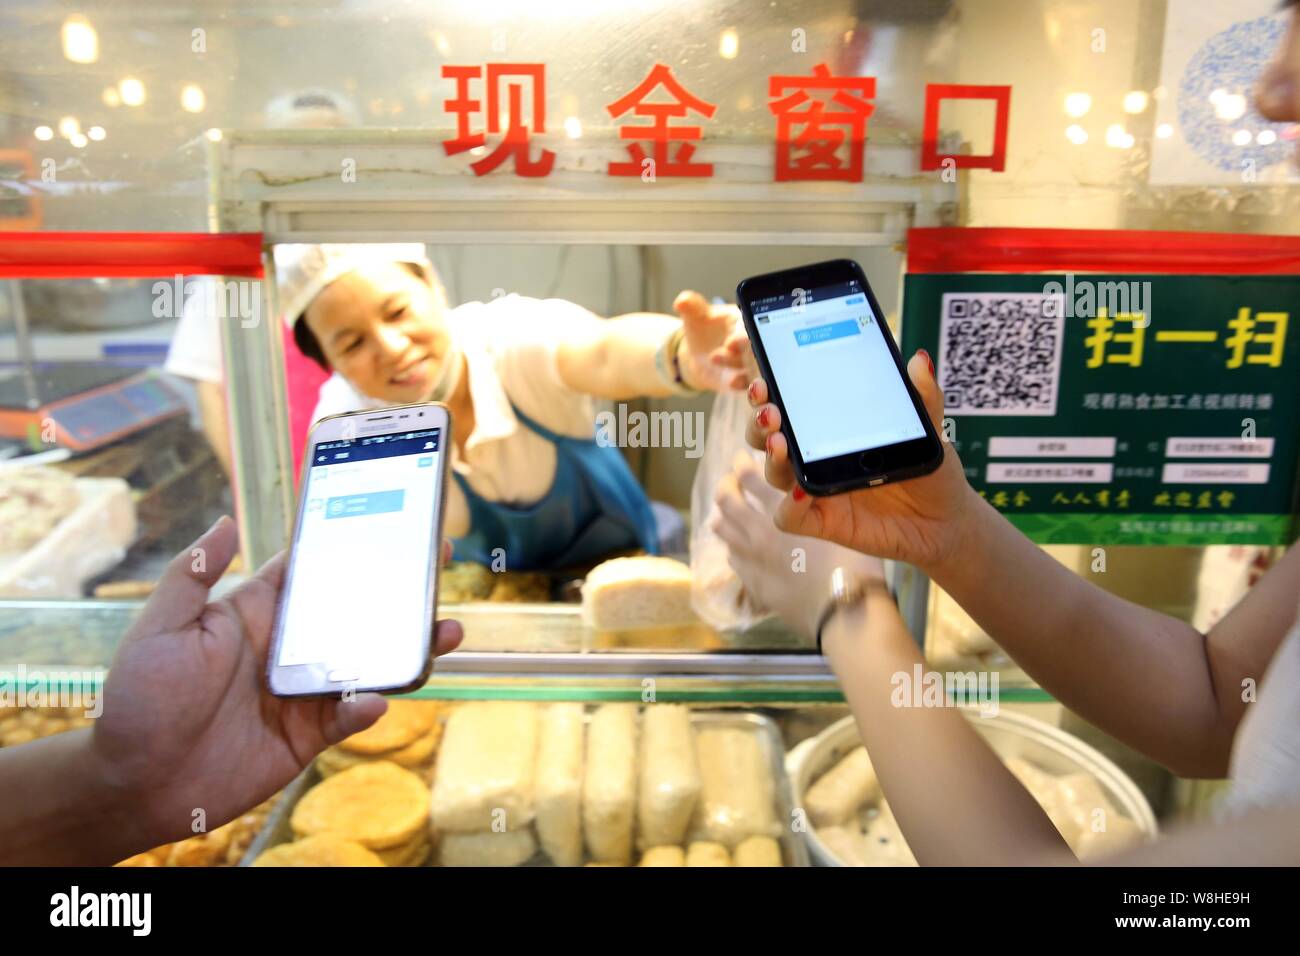 Chinese customers get their purchases after paying via mobile payment service Alipay of Alibaba Group on their smartphones at a free market in Wenzhou Stock Photo